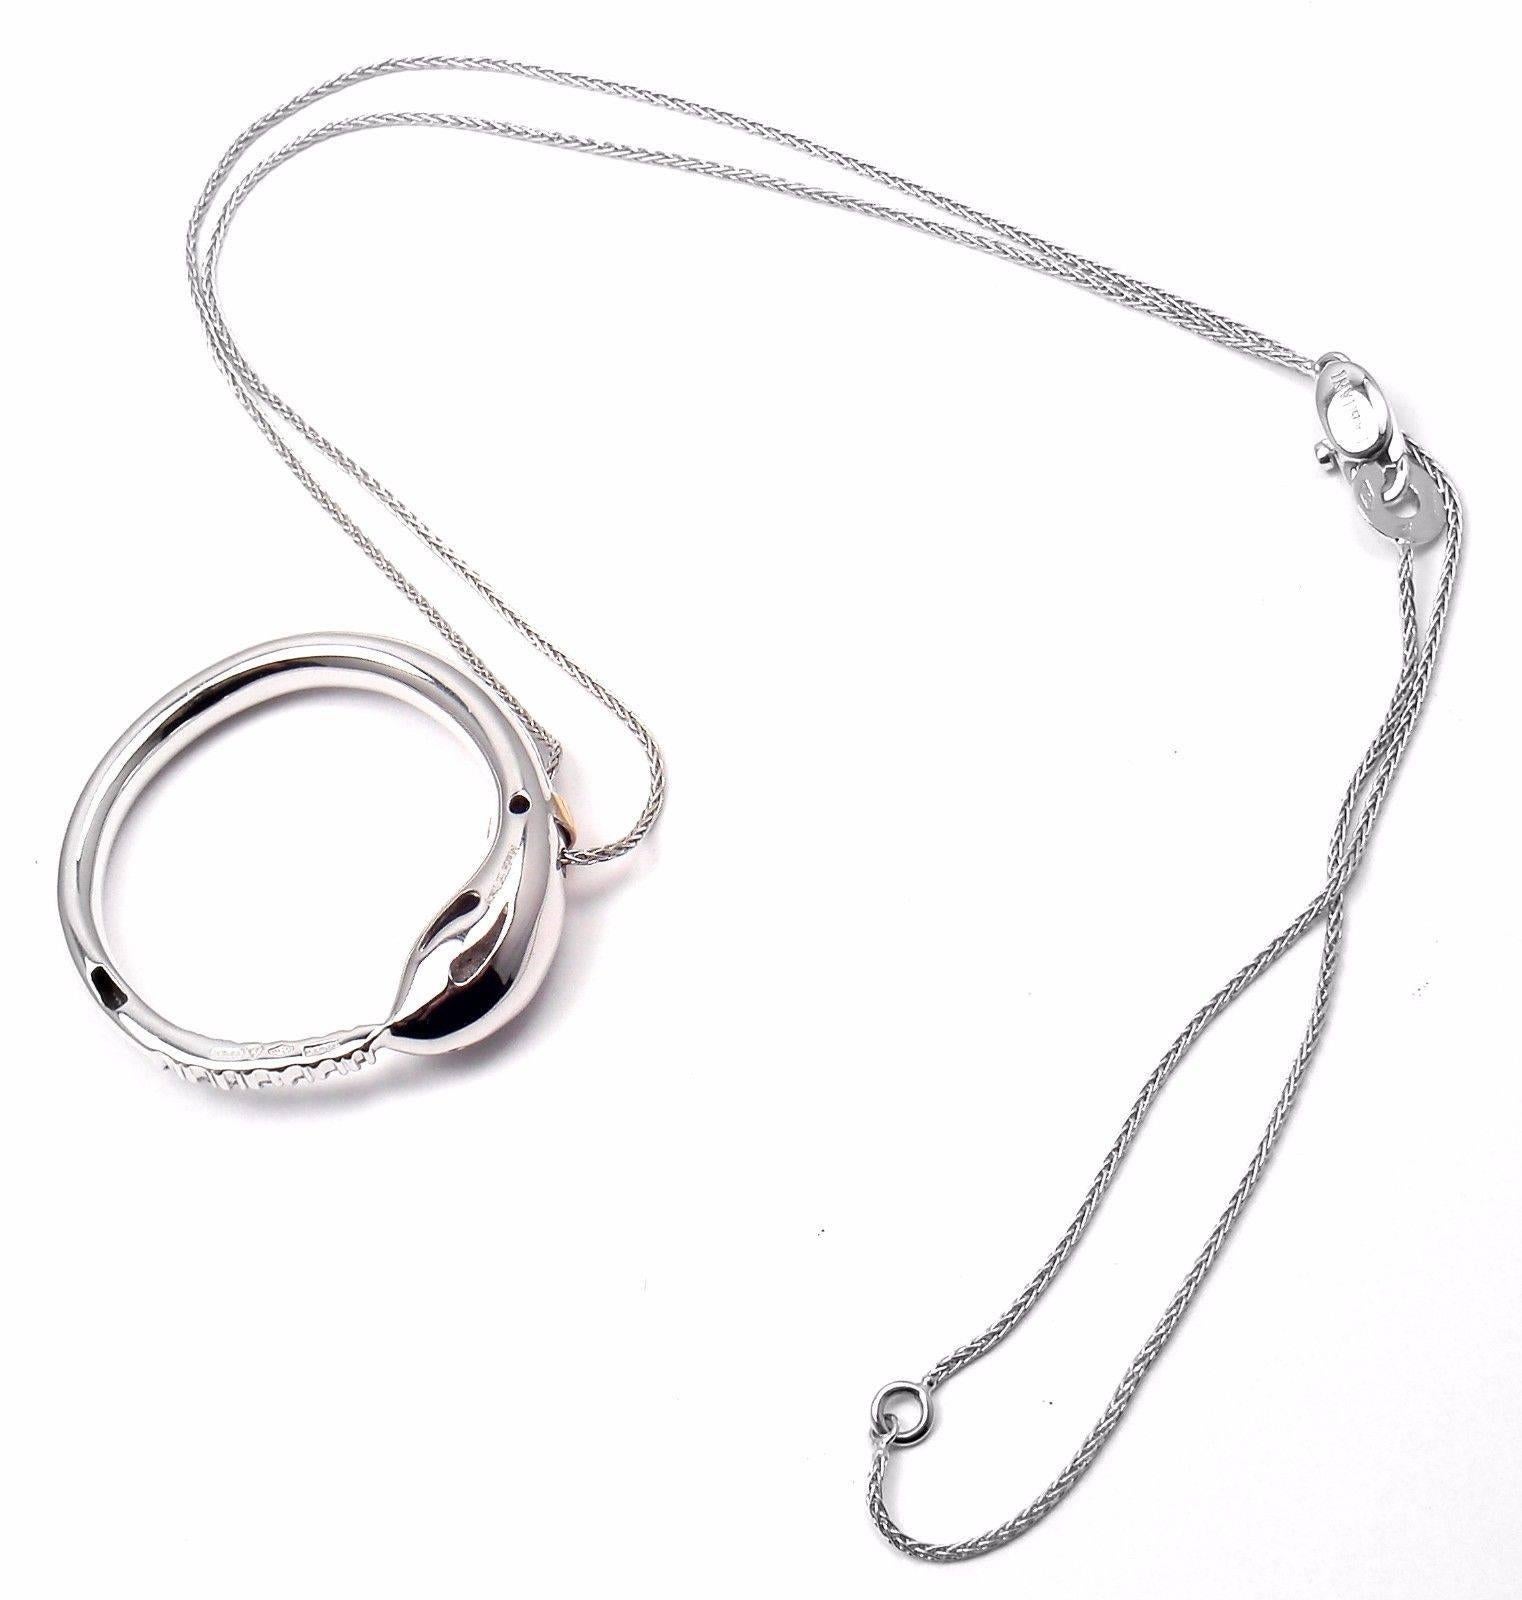 Damiani Infinito Diamond Snake White Gold Pendant Necklace In New Condition For Sale In Holland, PA